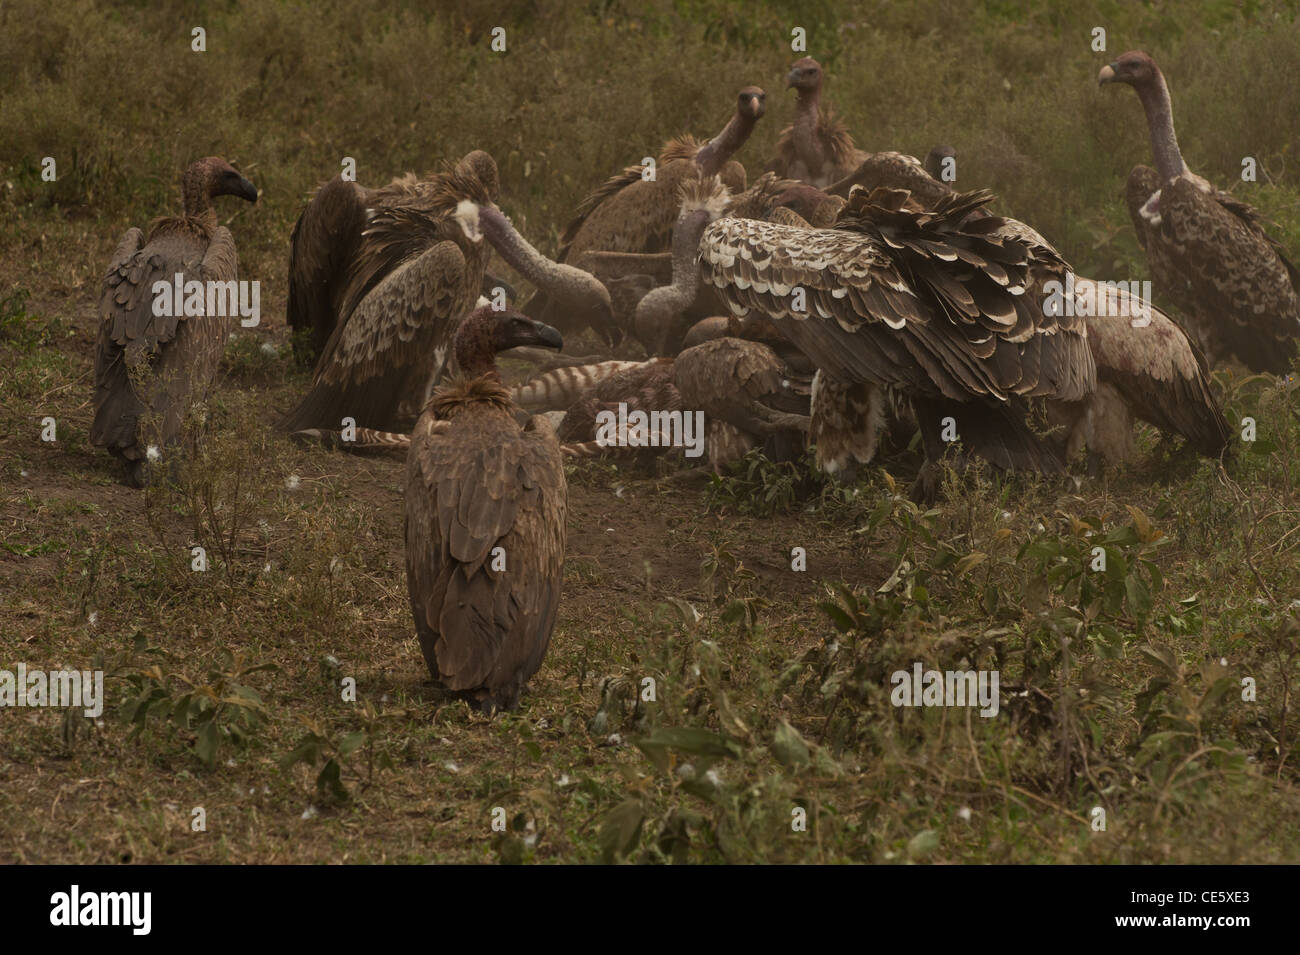 A wake (group of feeding vultures) of Vultures eating the carcass of a Zebra. Stock Photo